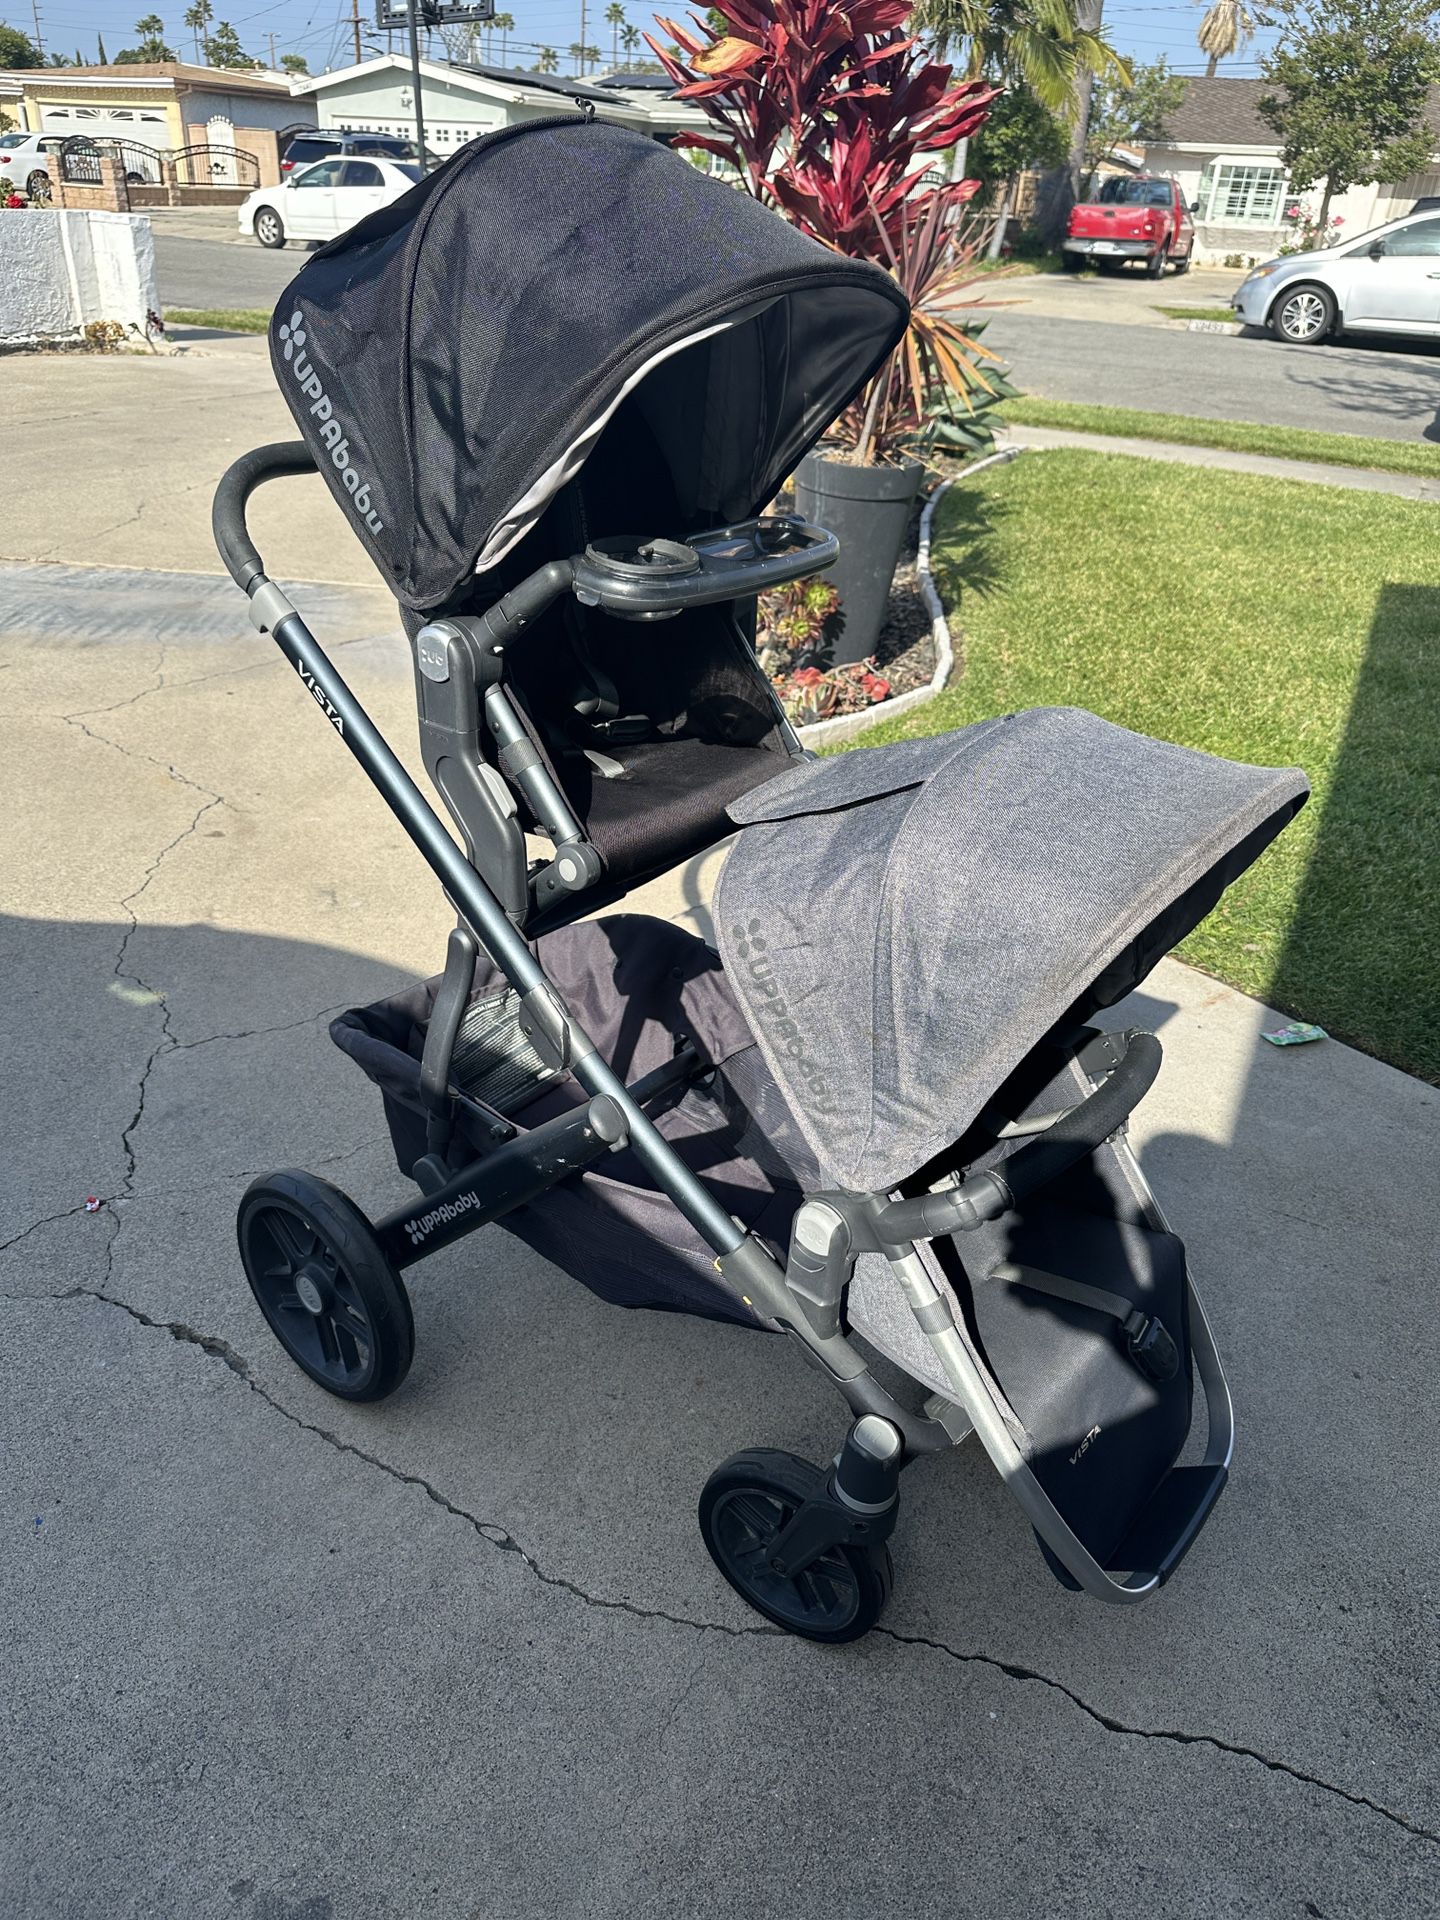 UPPAbaby Single + Double System Stroller in Charcoal + Second Seat + Adapter and Organizer Black Charcoal 